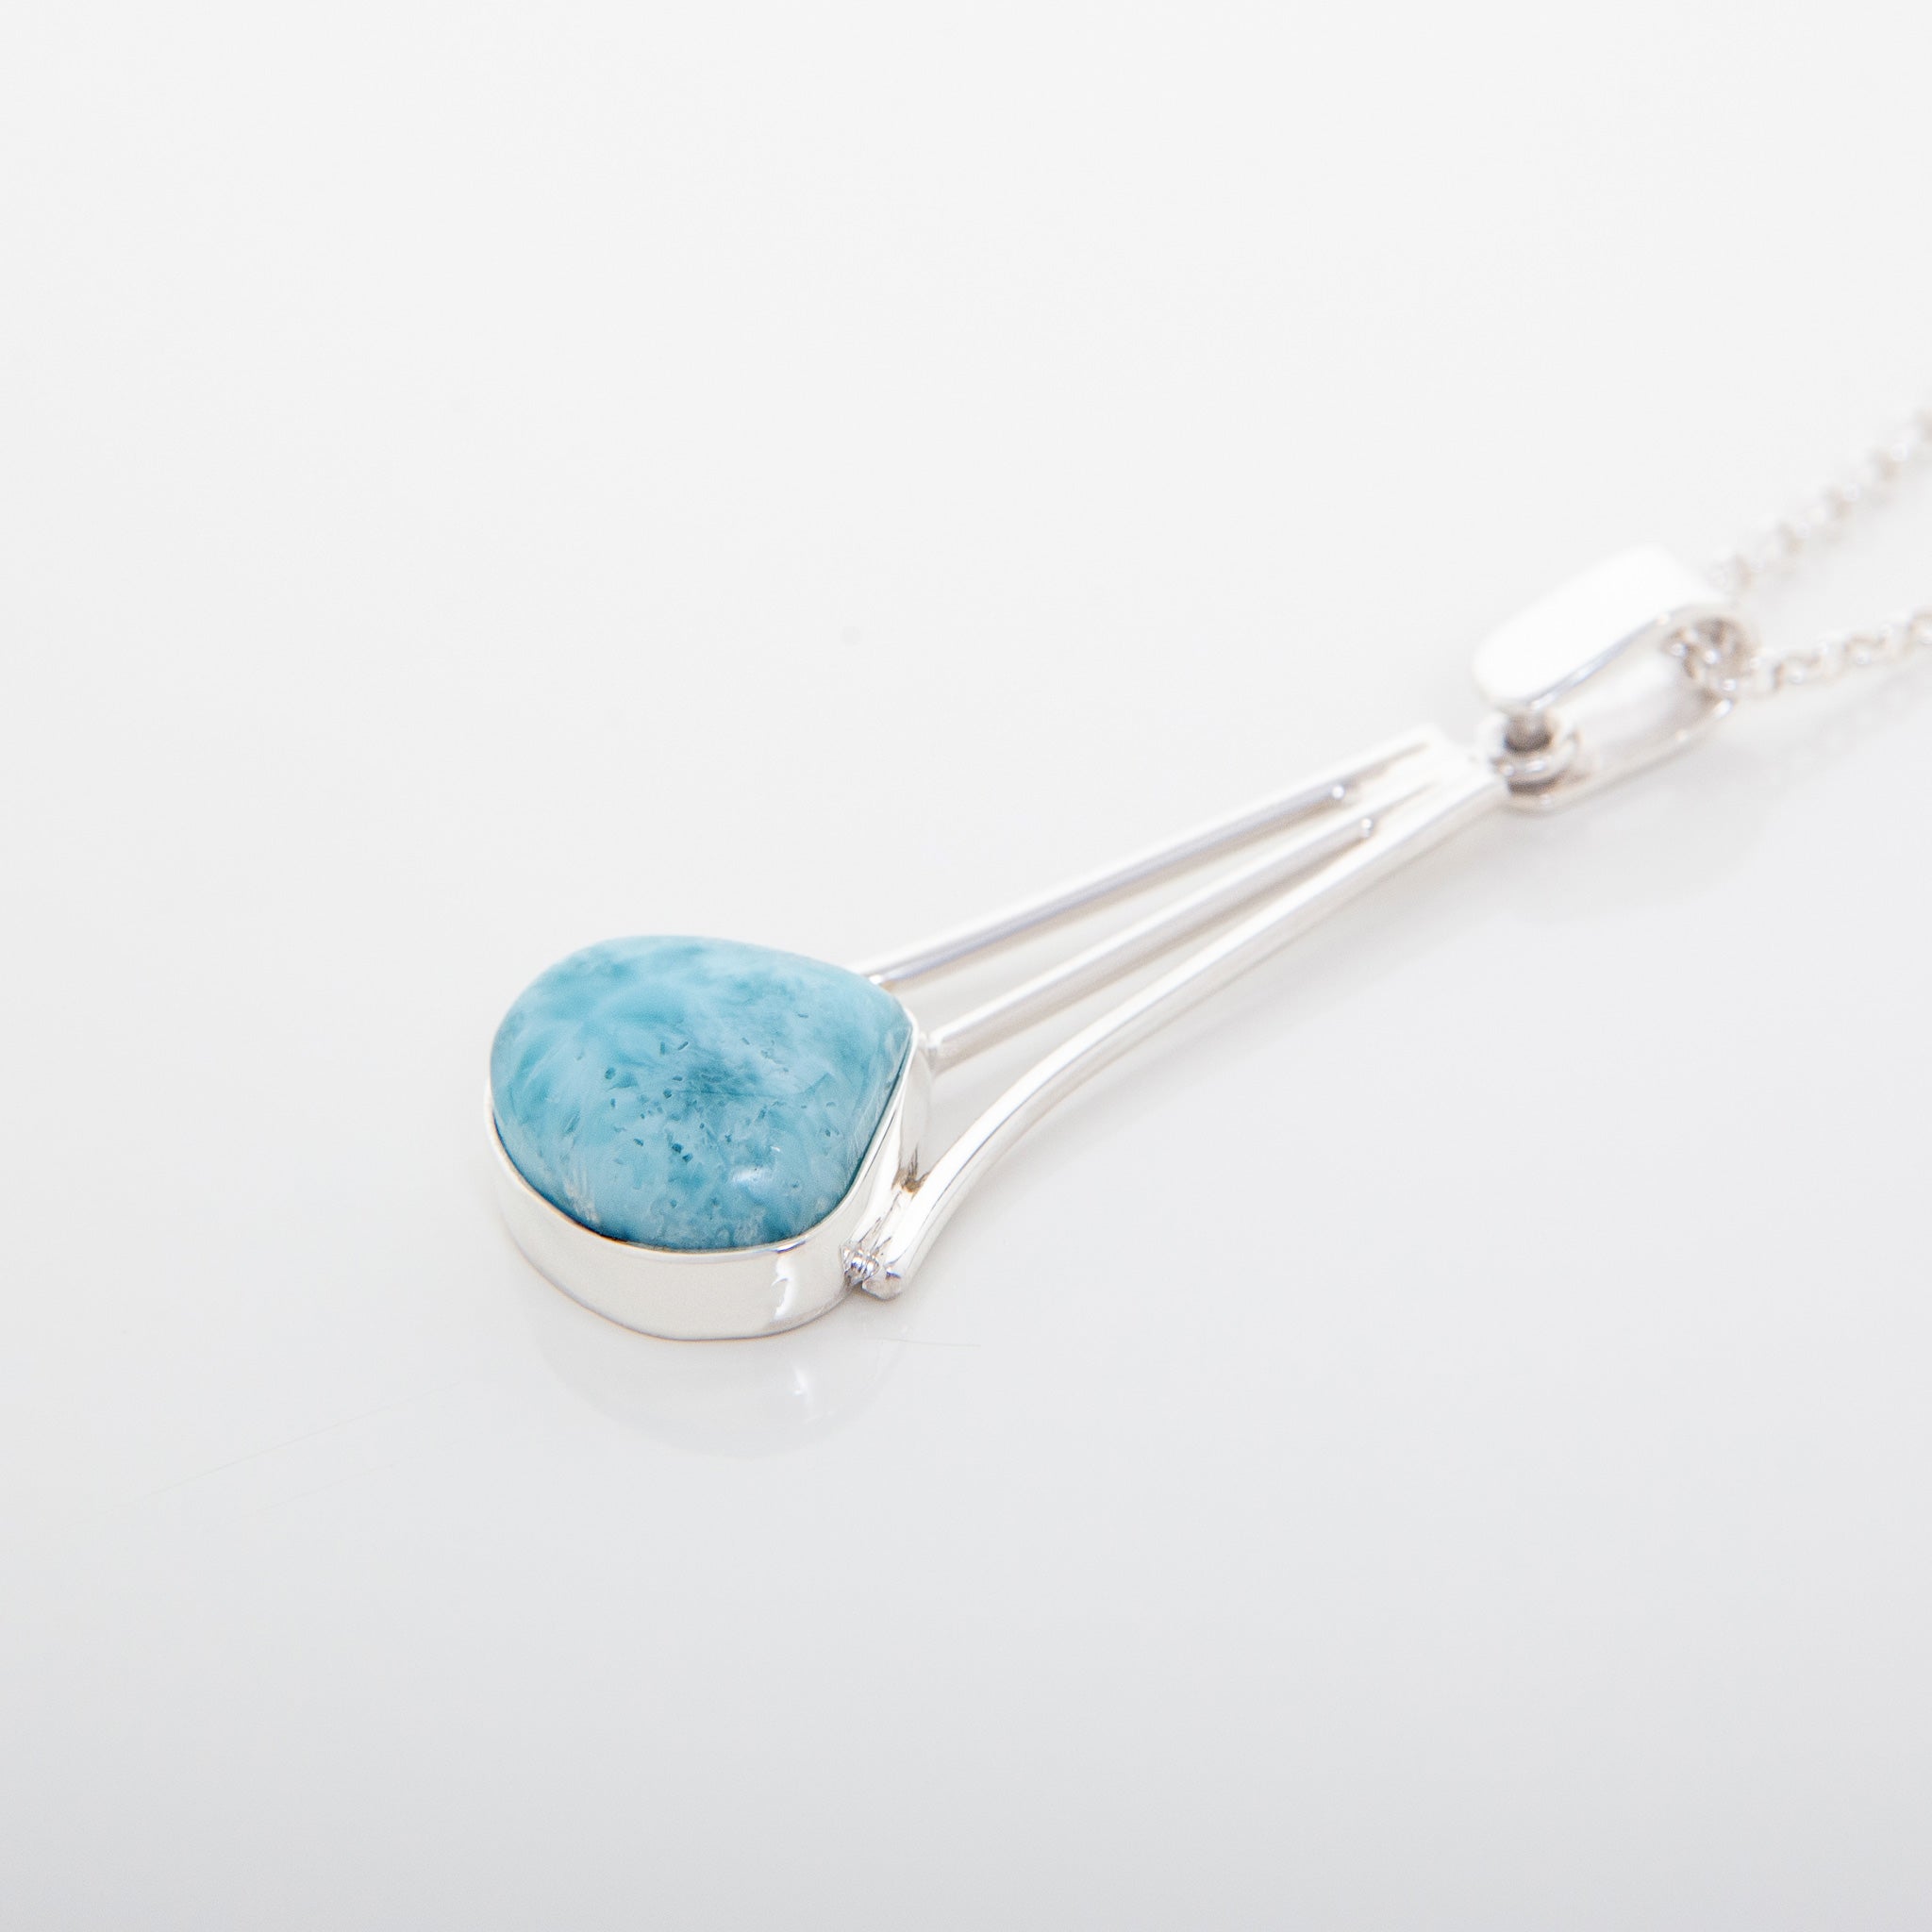 Real Larimar Jewelry from Dominican Republic designed and handcrafted by The Larimar Shop